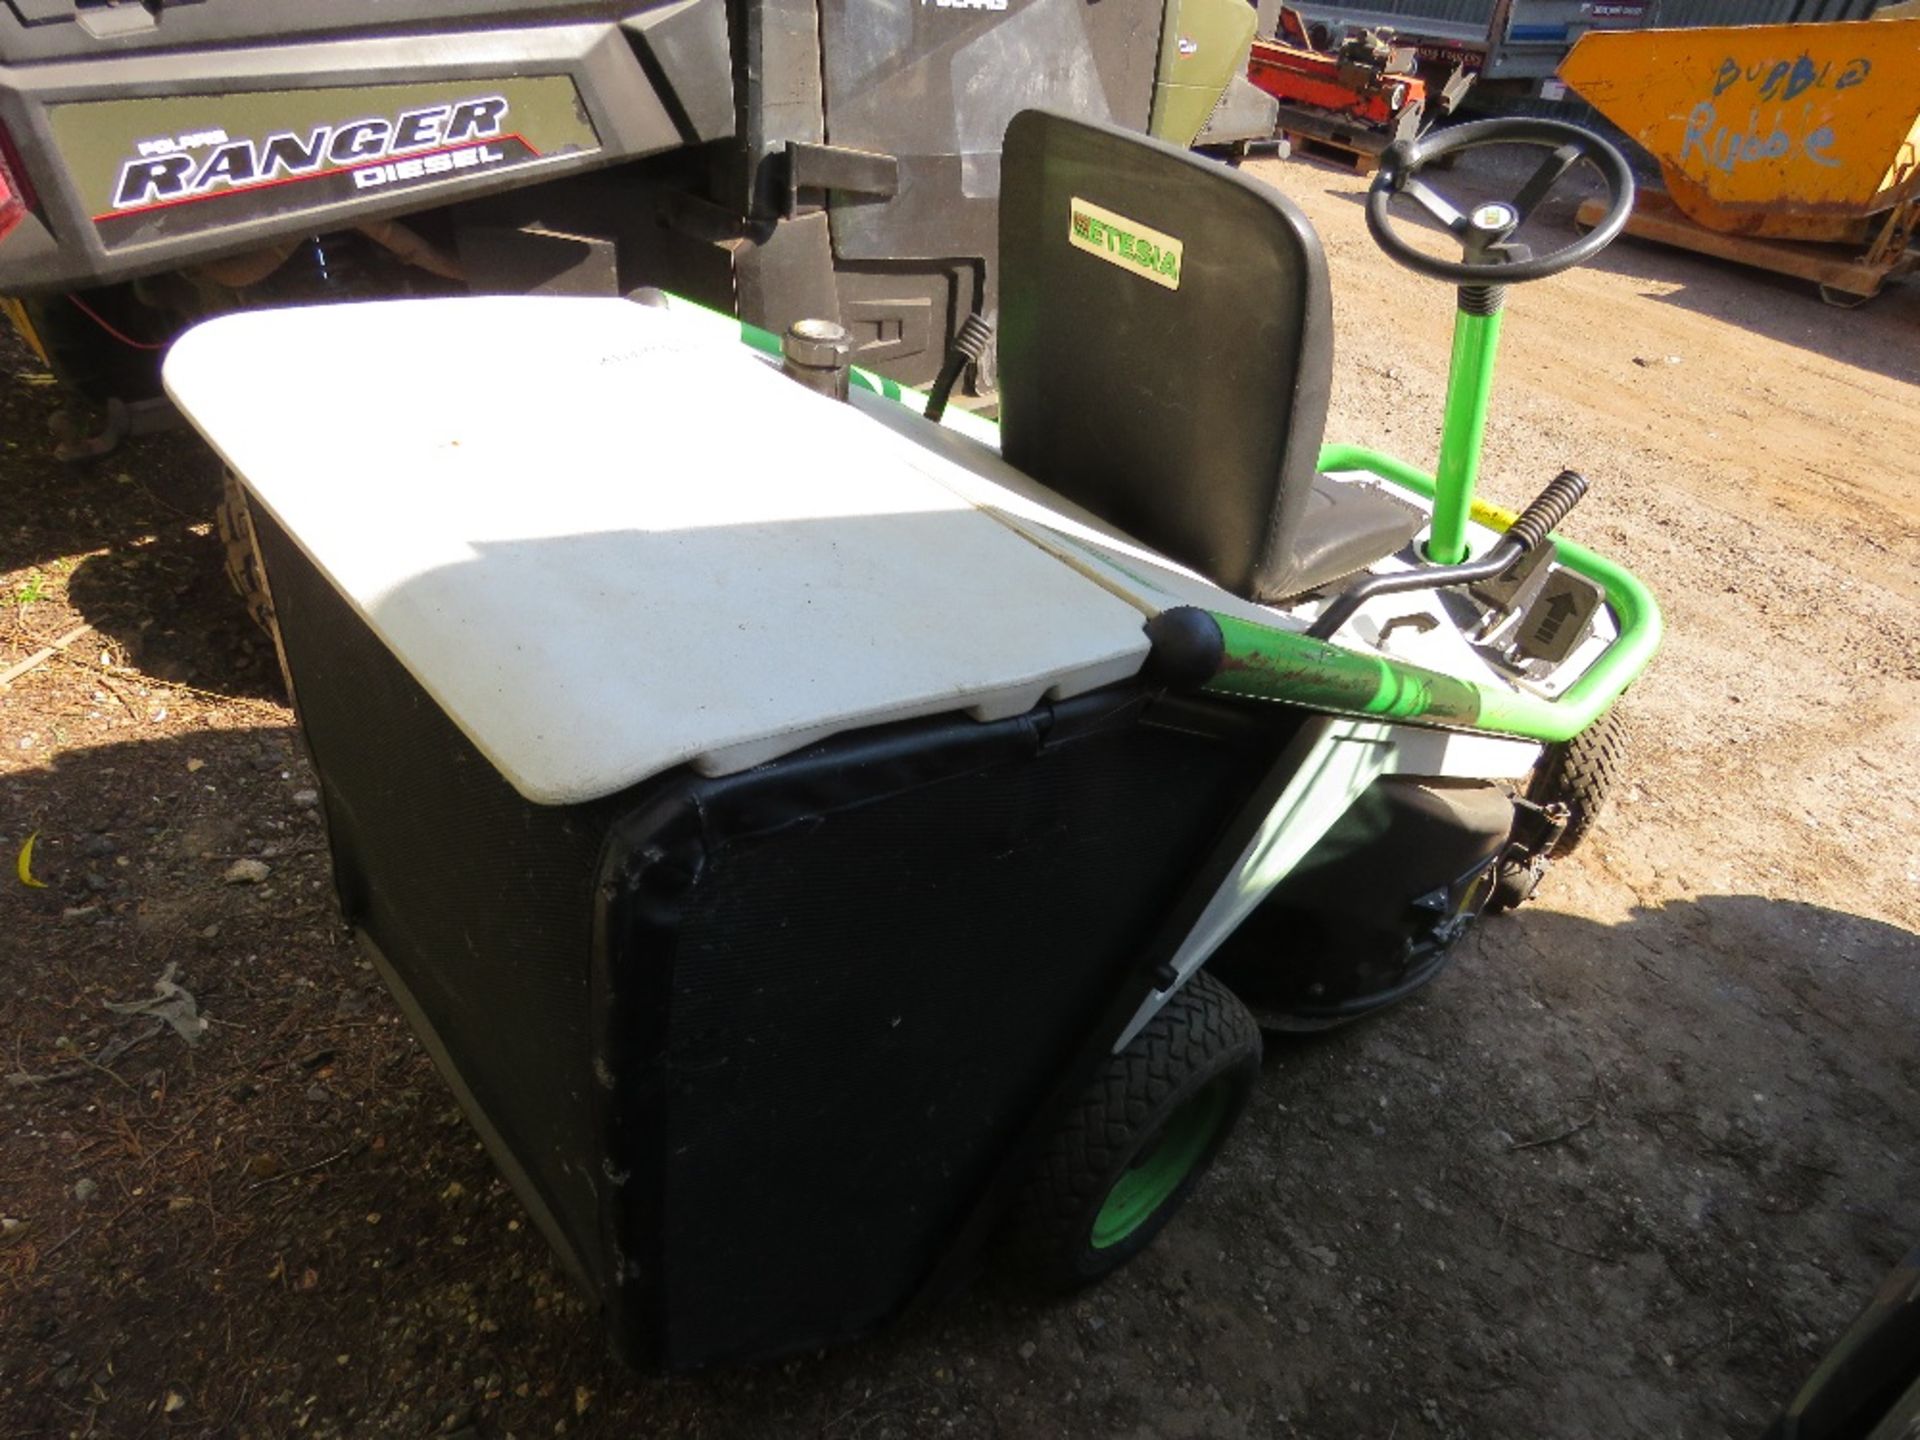 ETESIA PROFESSIONAL HYDRO RIDE ON MOWER WITH REAR COLLECTOR. WHEN TESTED WAS SEEN TO RUN AND DRIVE A - Image 5 of 9